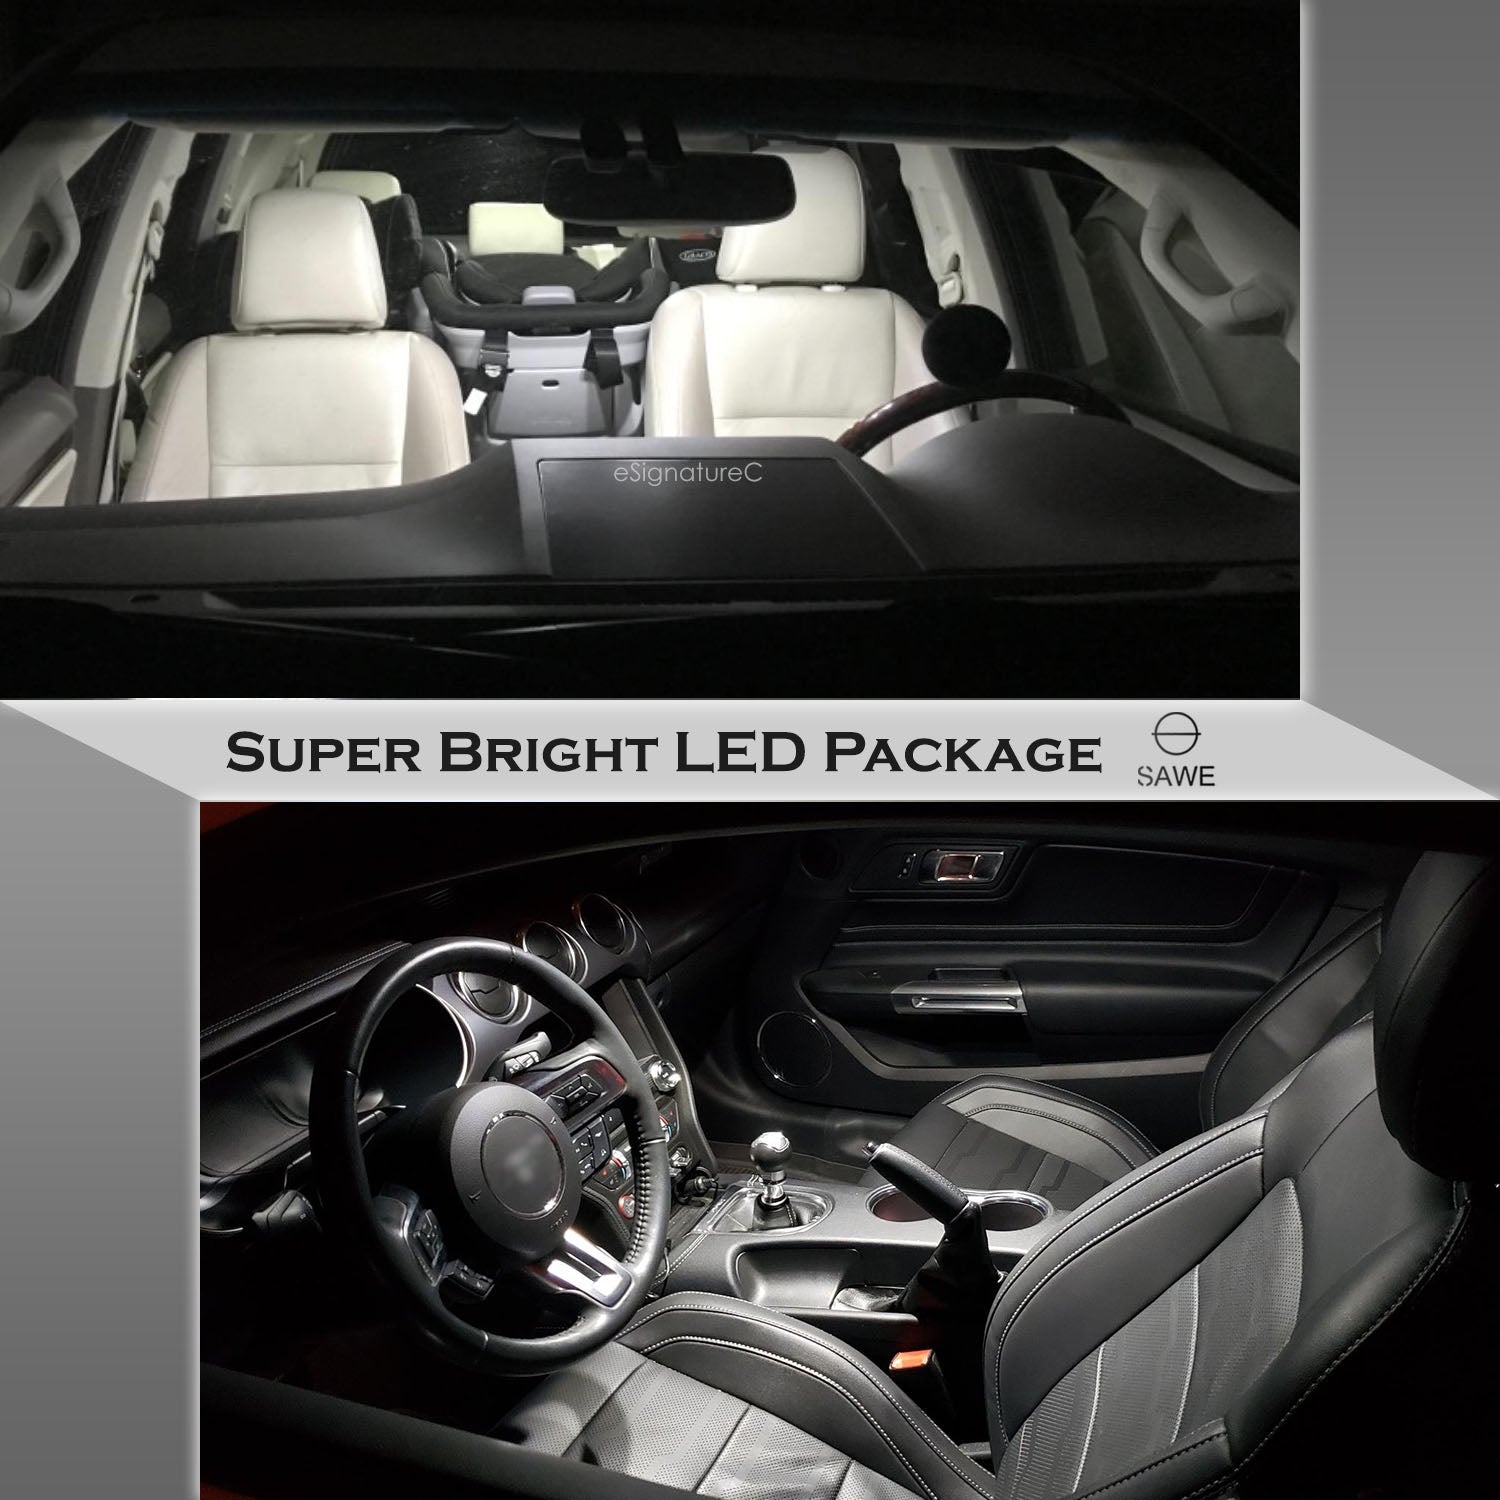 For Toyota Camry Interior LED Lights - Dome & Map Lights Package Kit for 2007 - 2011 - White